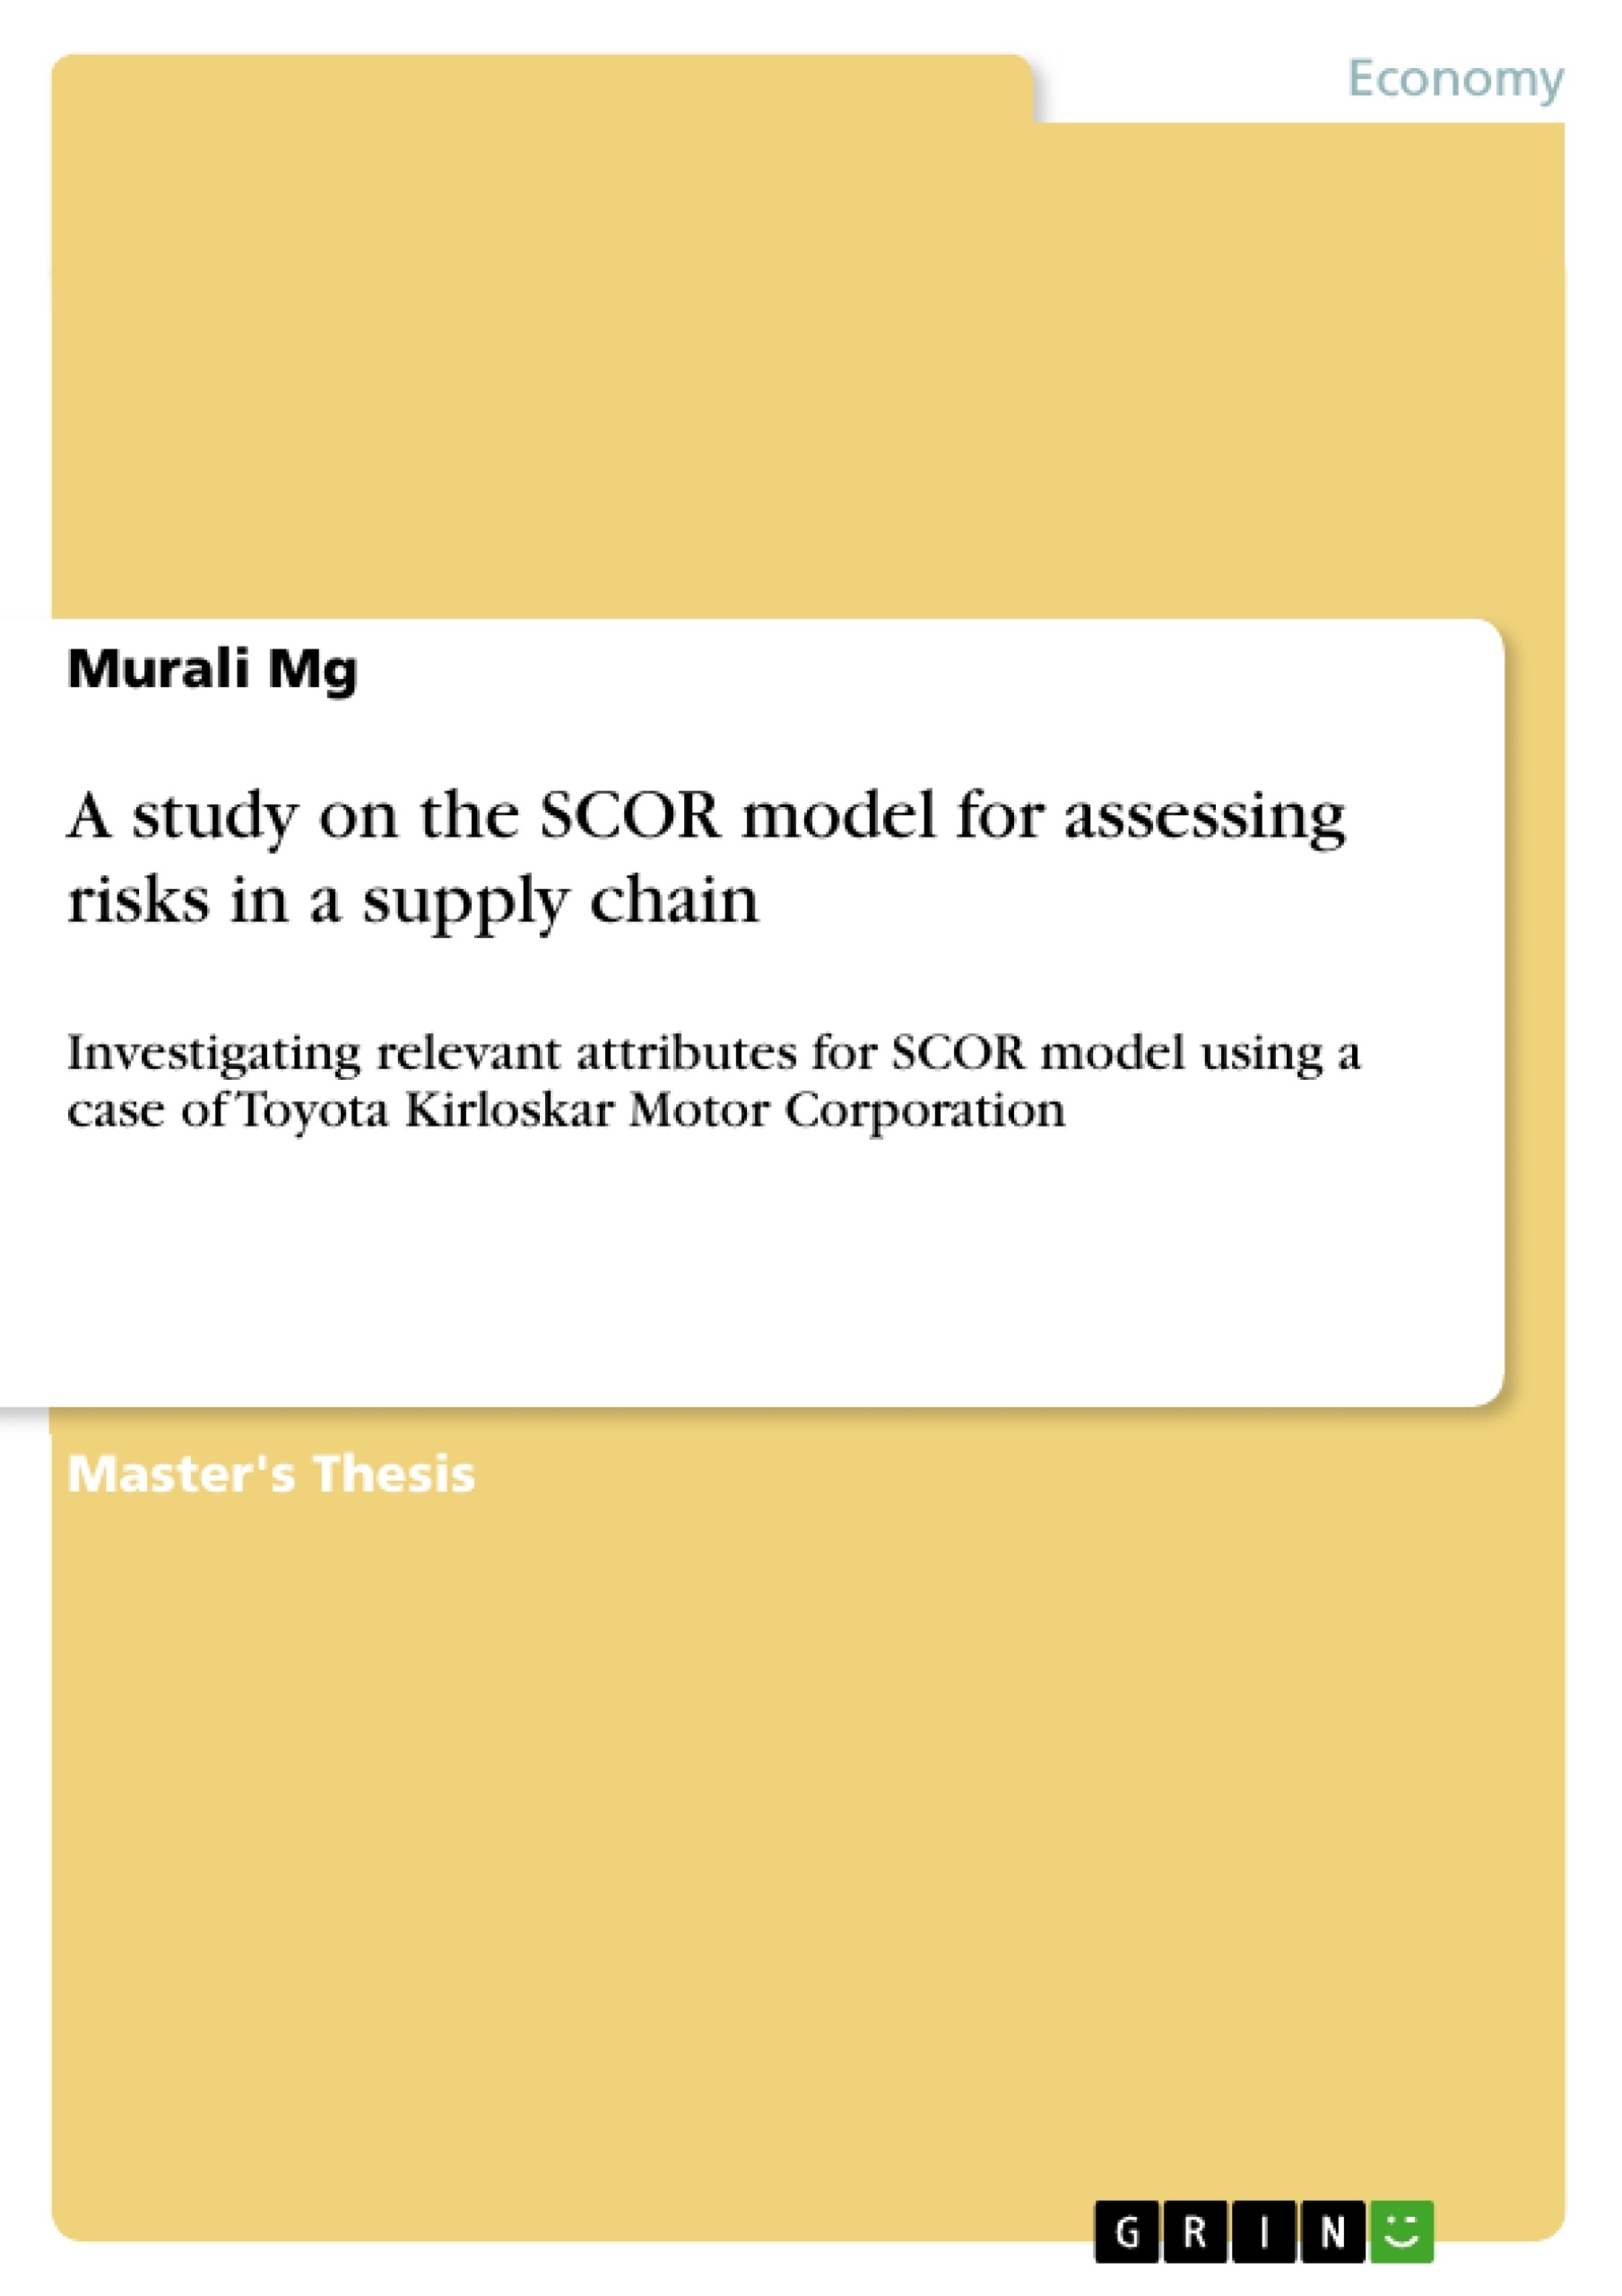 Title: A study on the SCOR model for assessing risks in a supply chain